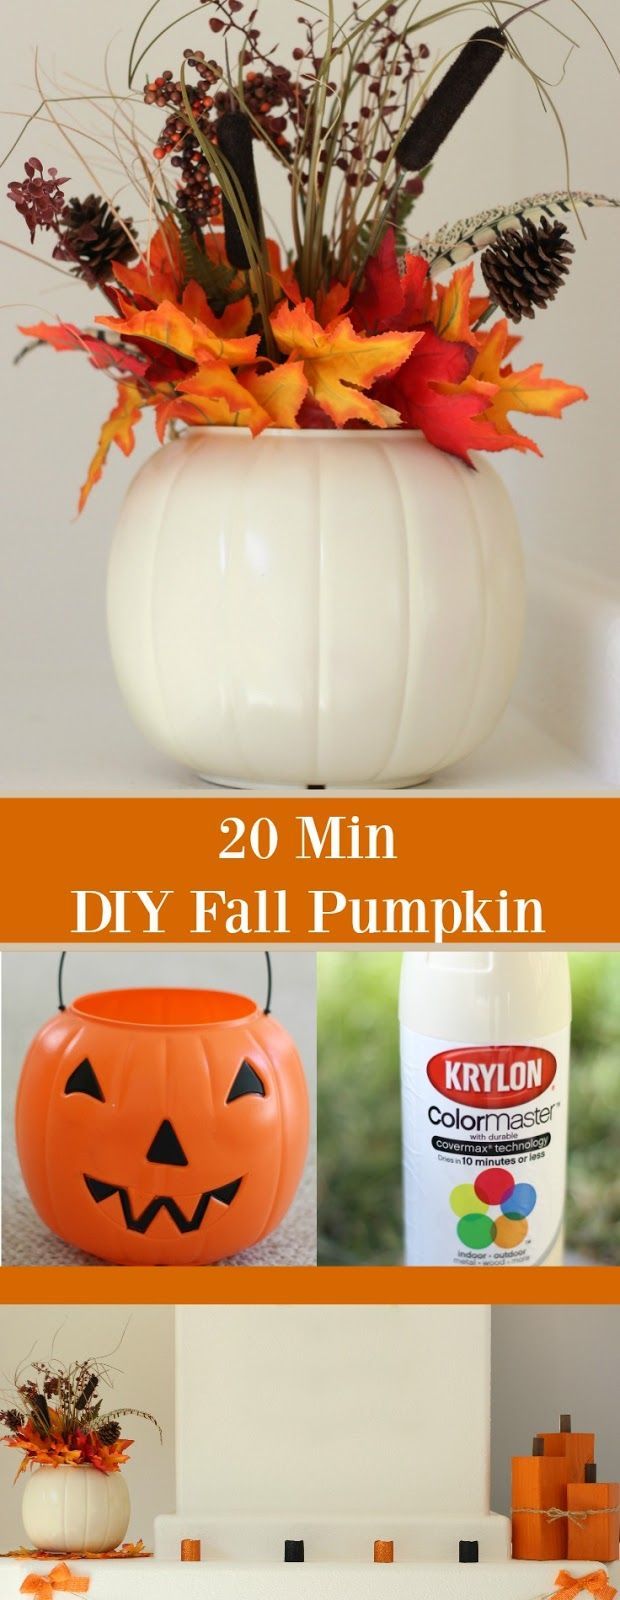 DIY Fall Pumpkin. This super easy DIY Fall Pumpkin only takes 20 minutes start to finish! Using a plastic pumpkin and a can of